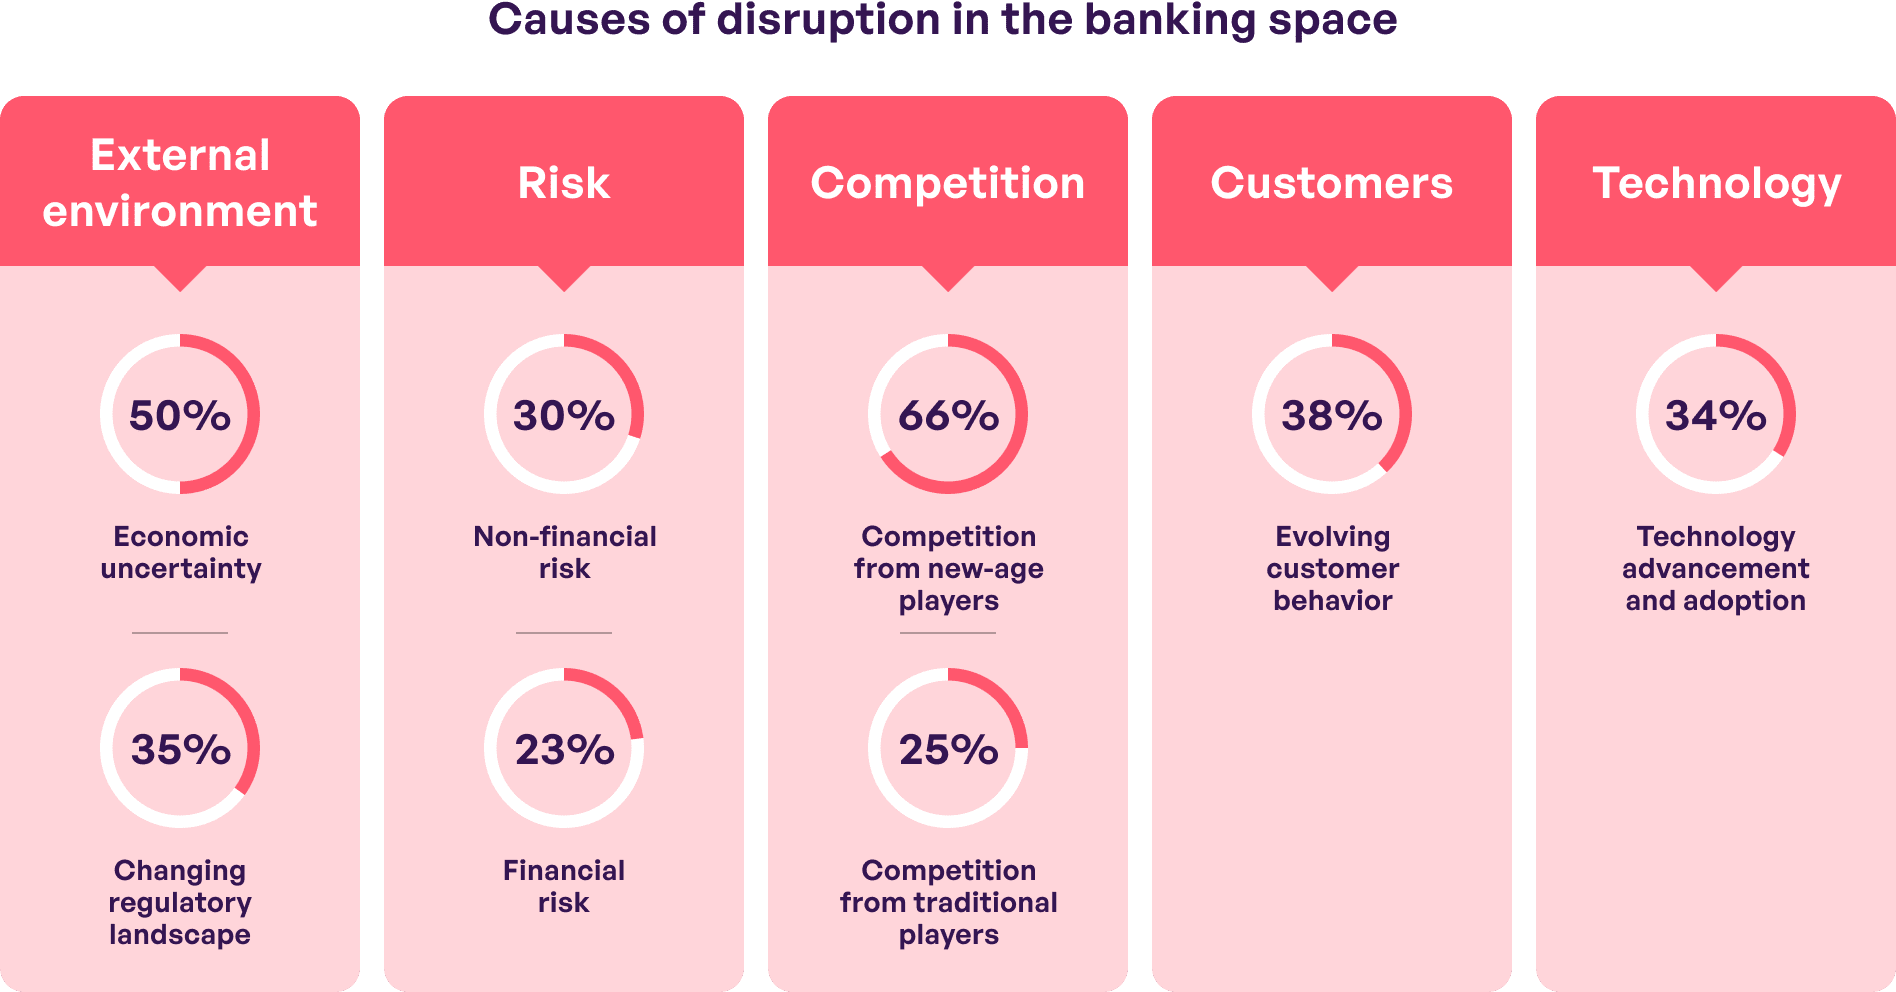 Causes of disruption in the banking space